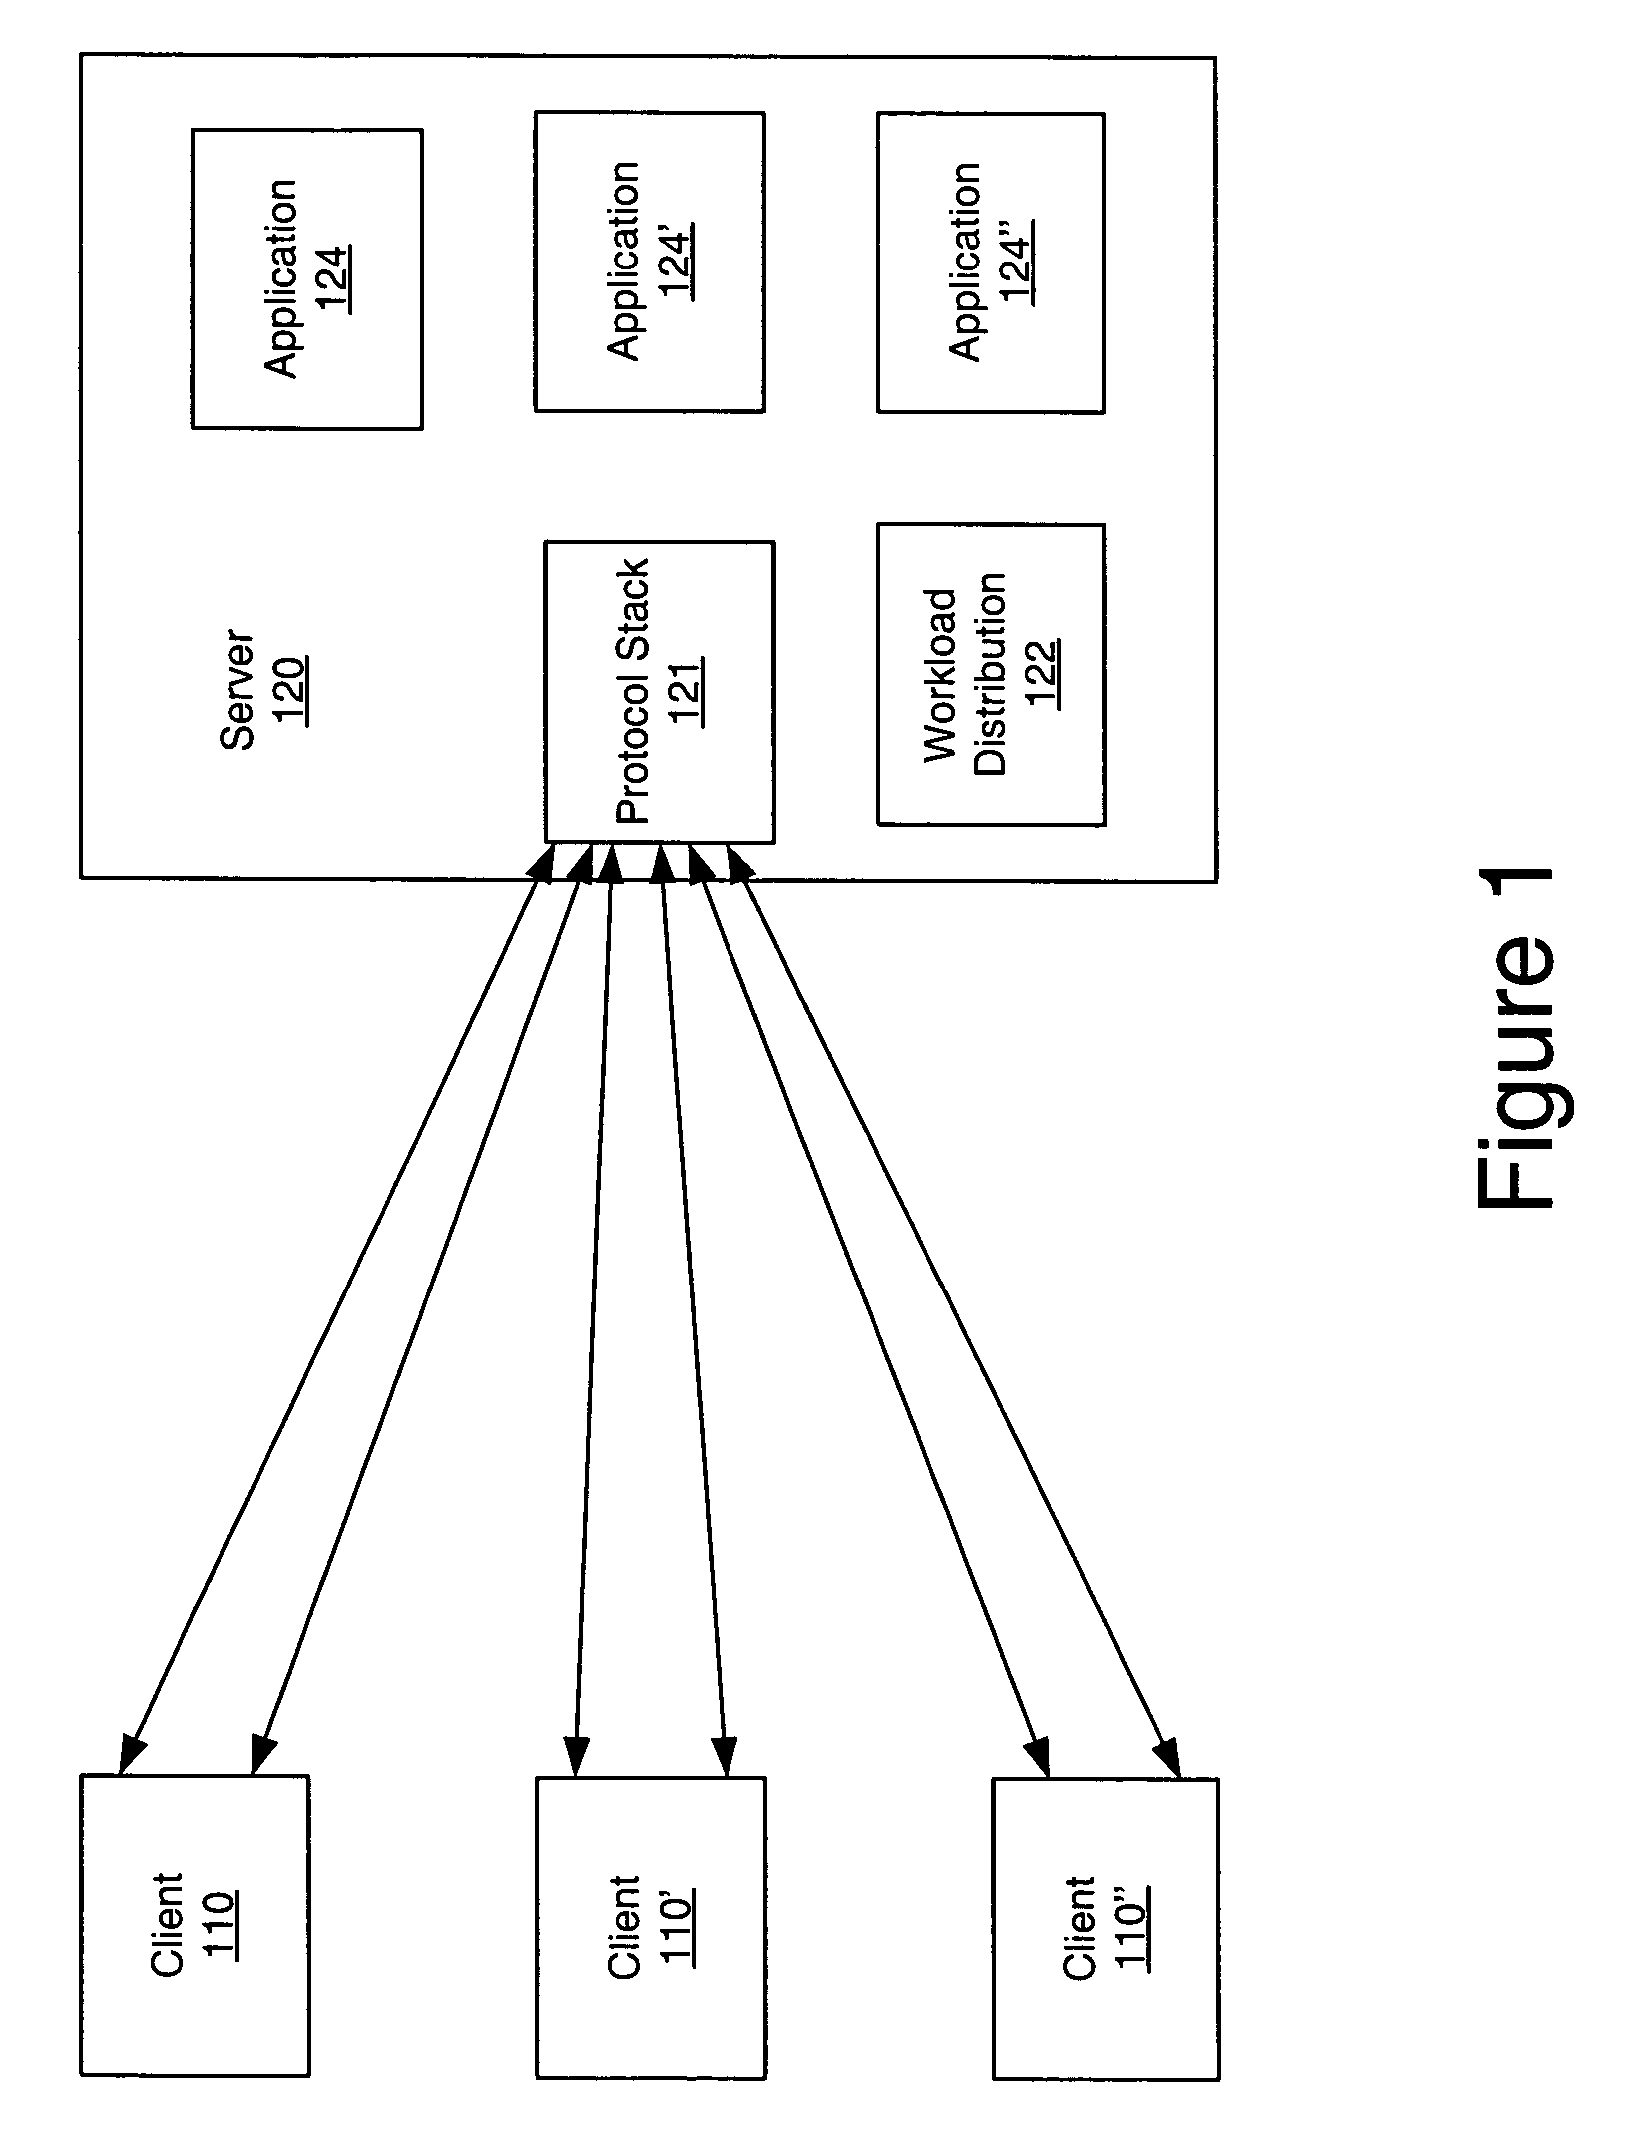 Methods, systems and computer program products for application instance level workload distribution affinities